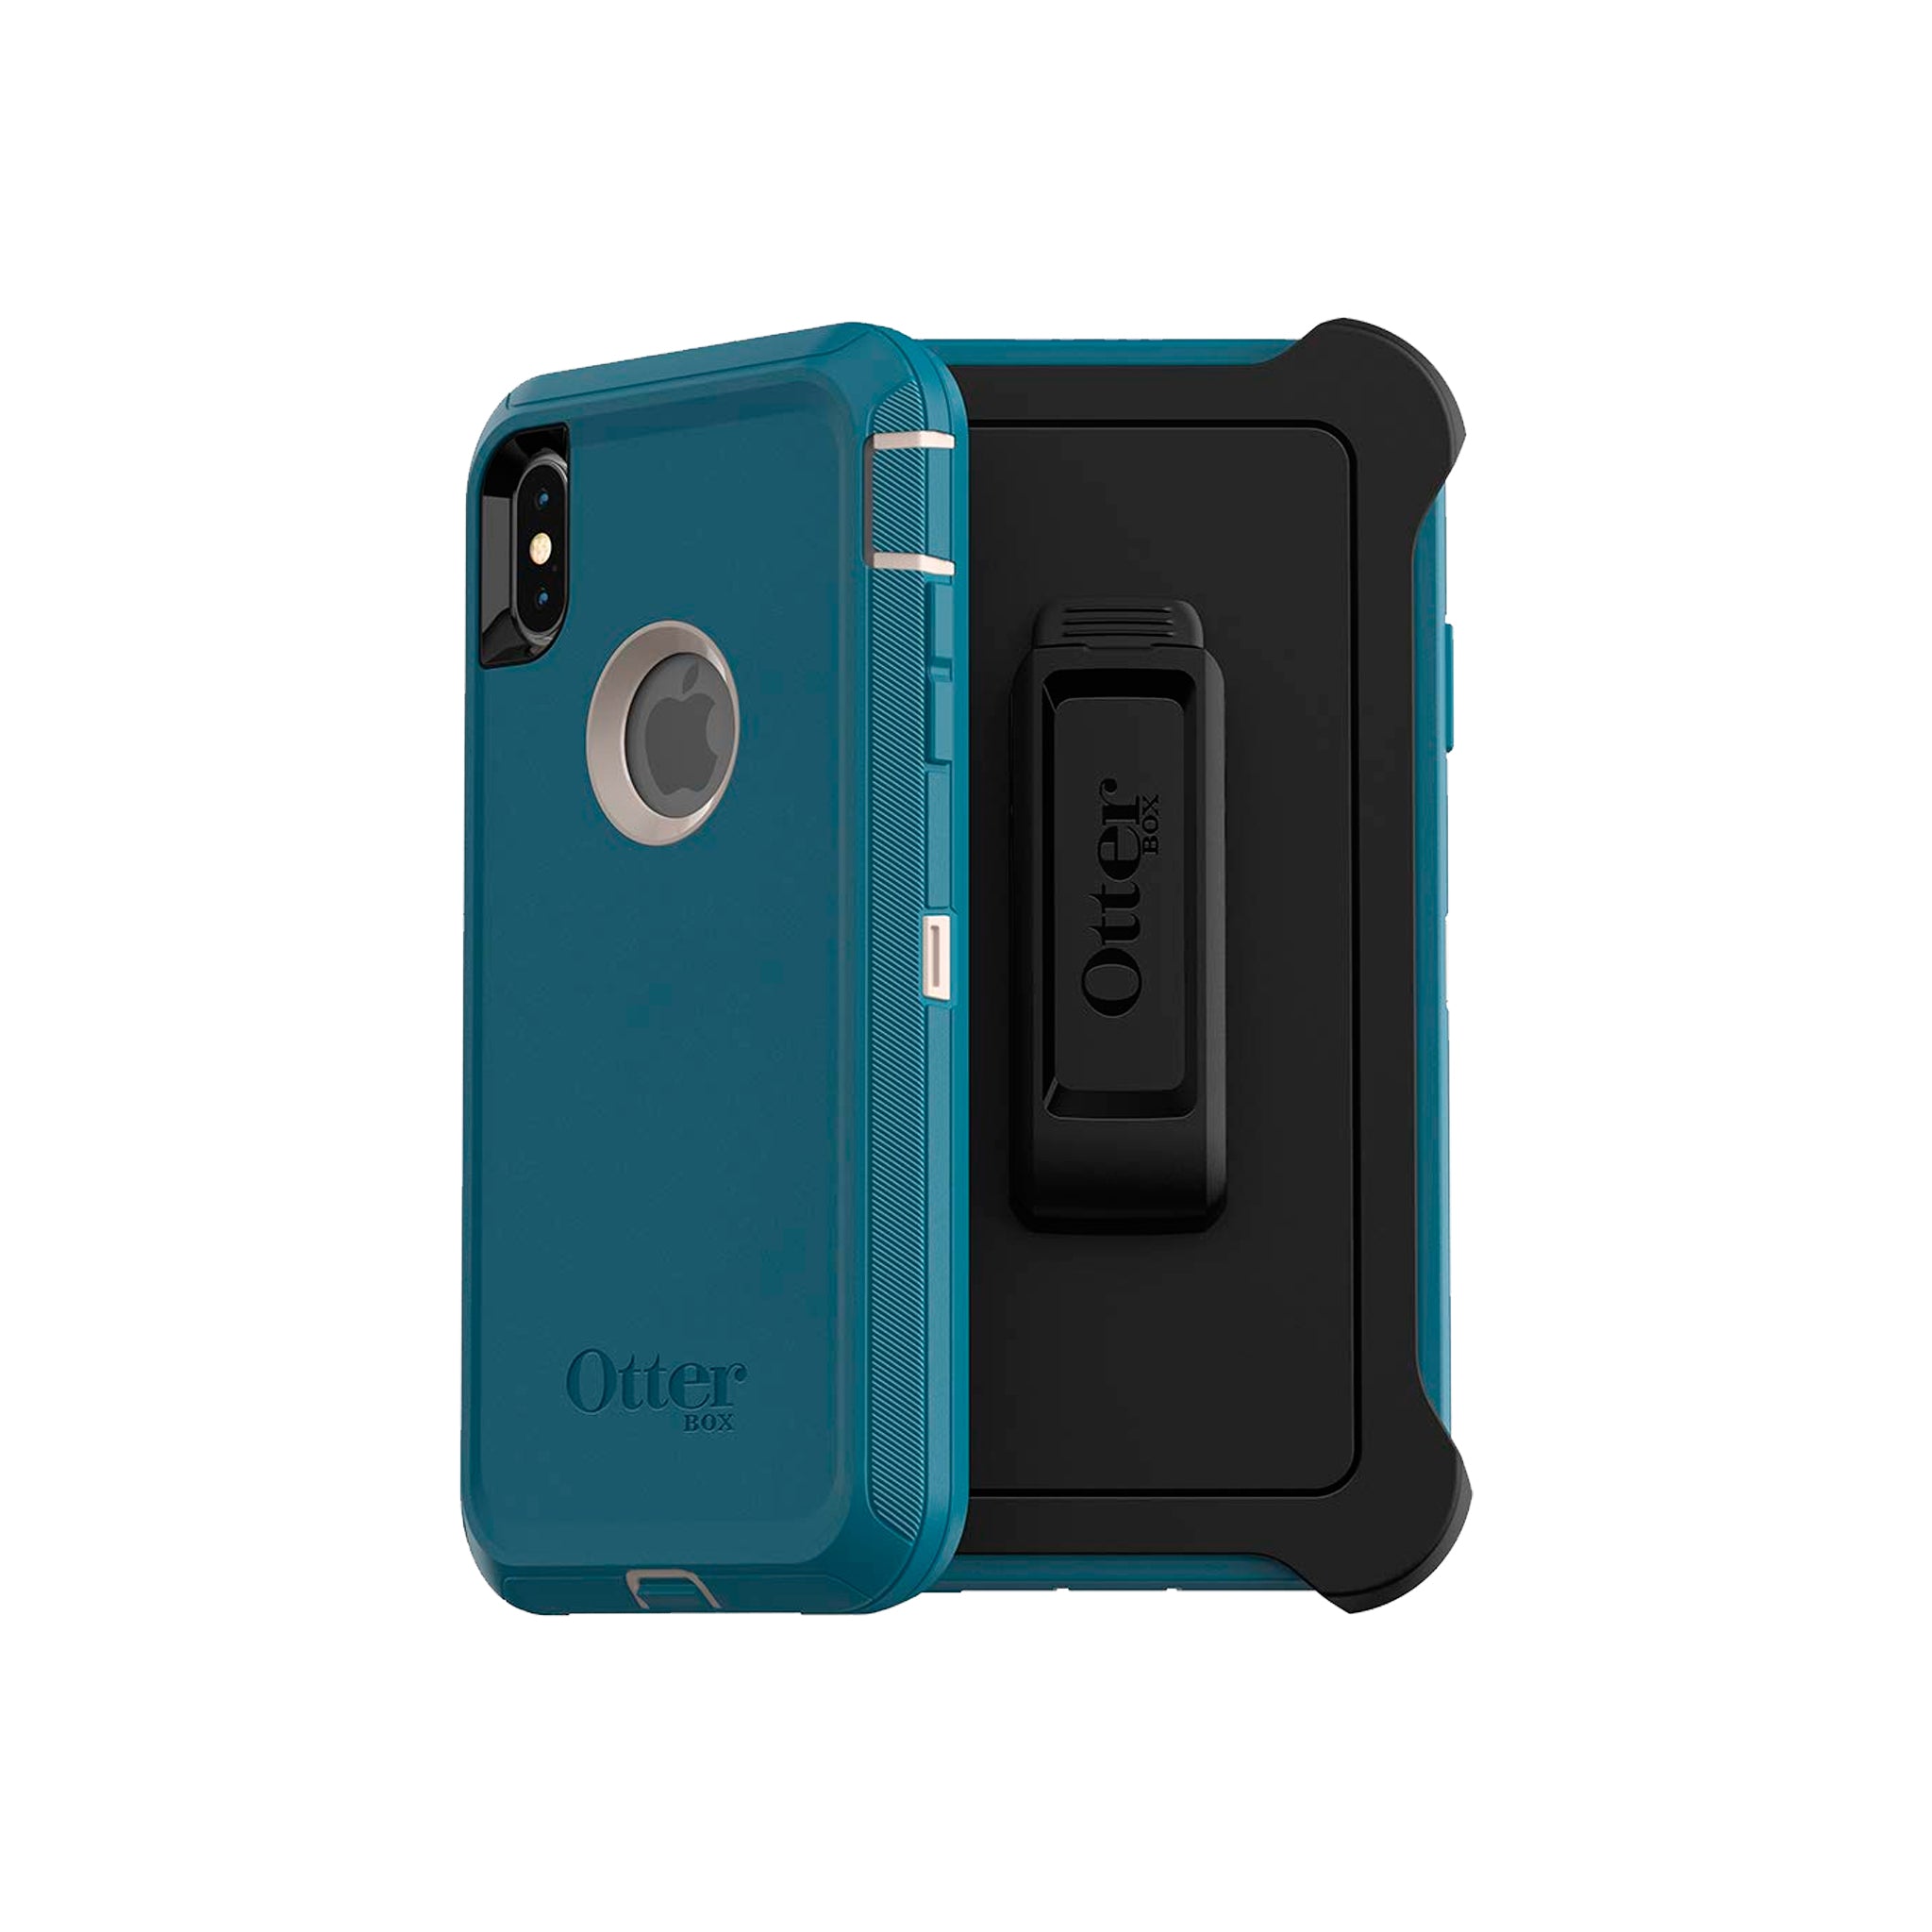 OtterBox - Defender Serie Case for iPhone XS Max - Big Sur